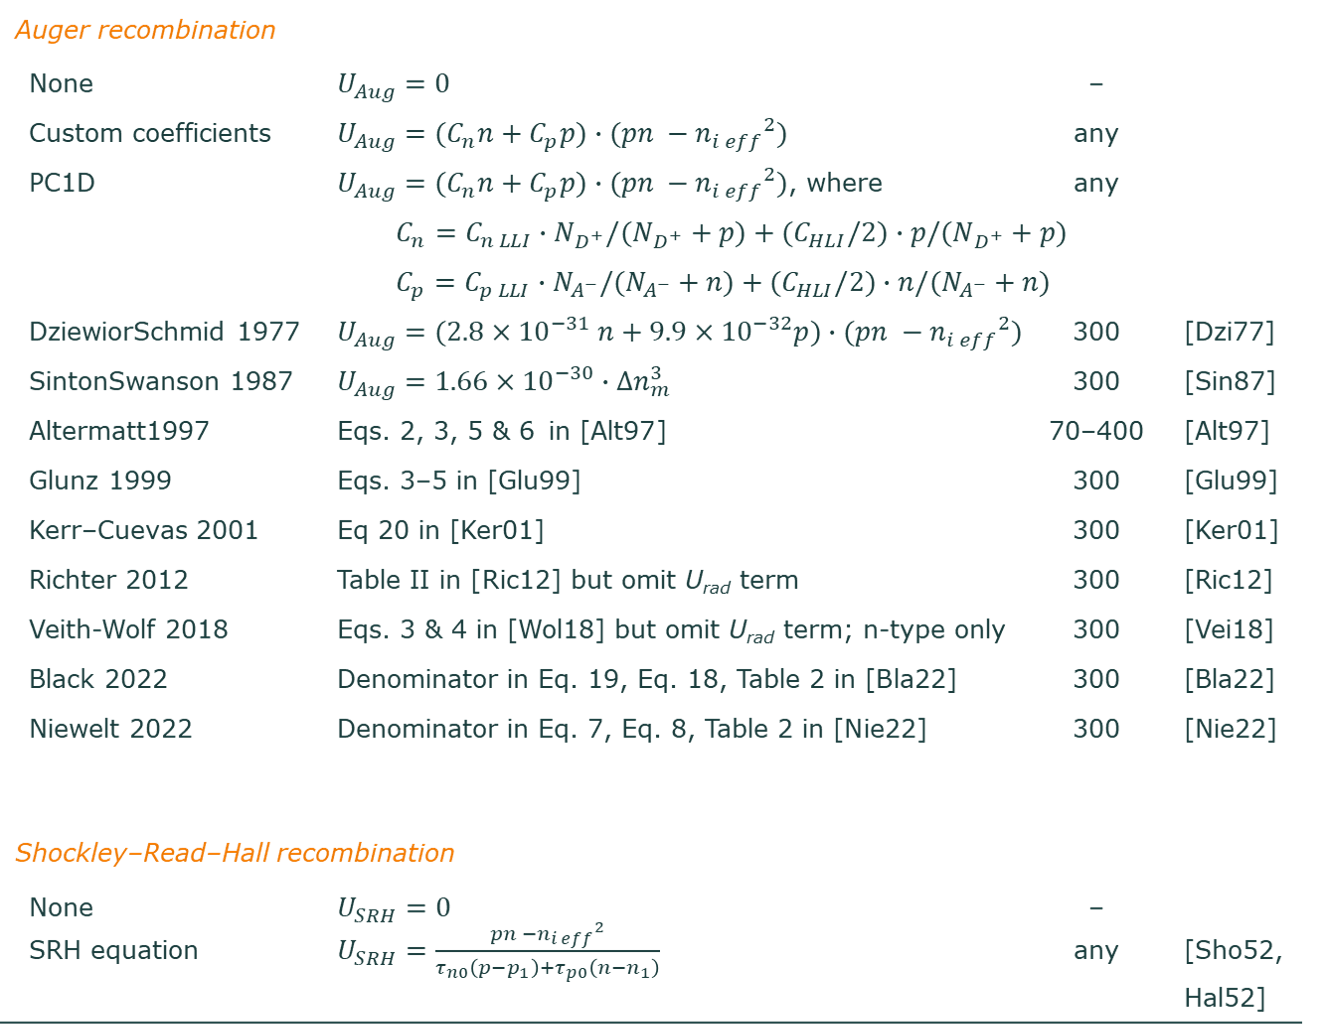 Table of recombination models - 2.